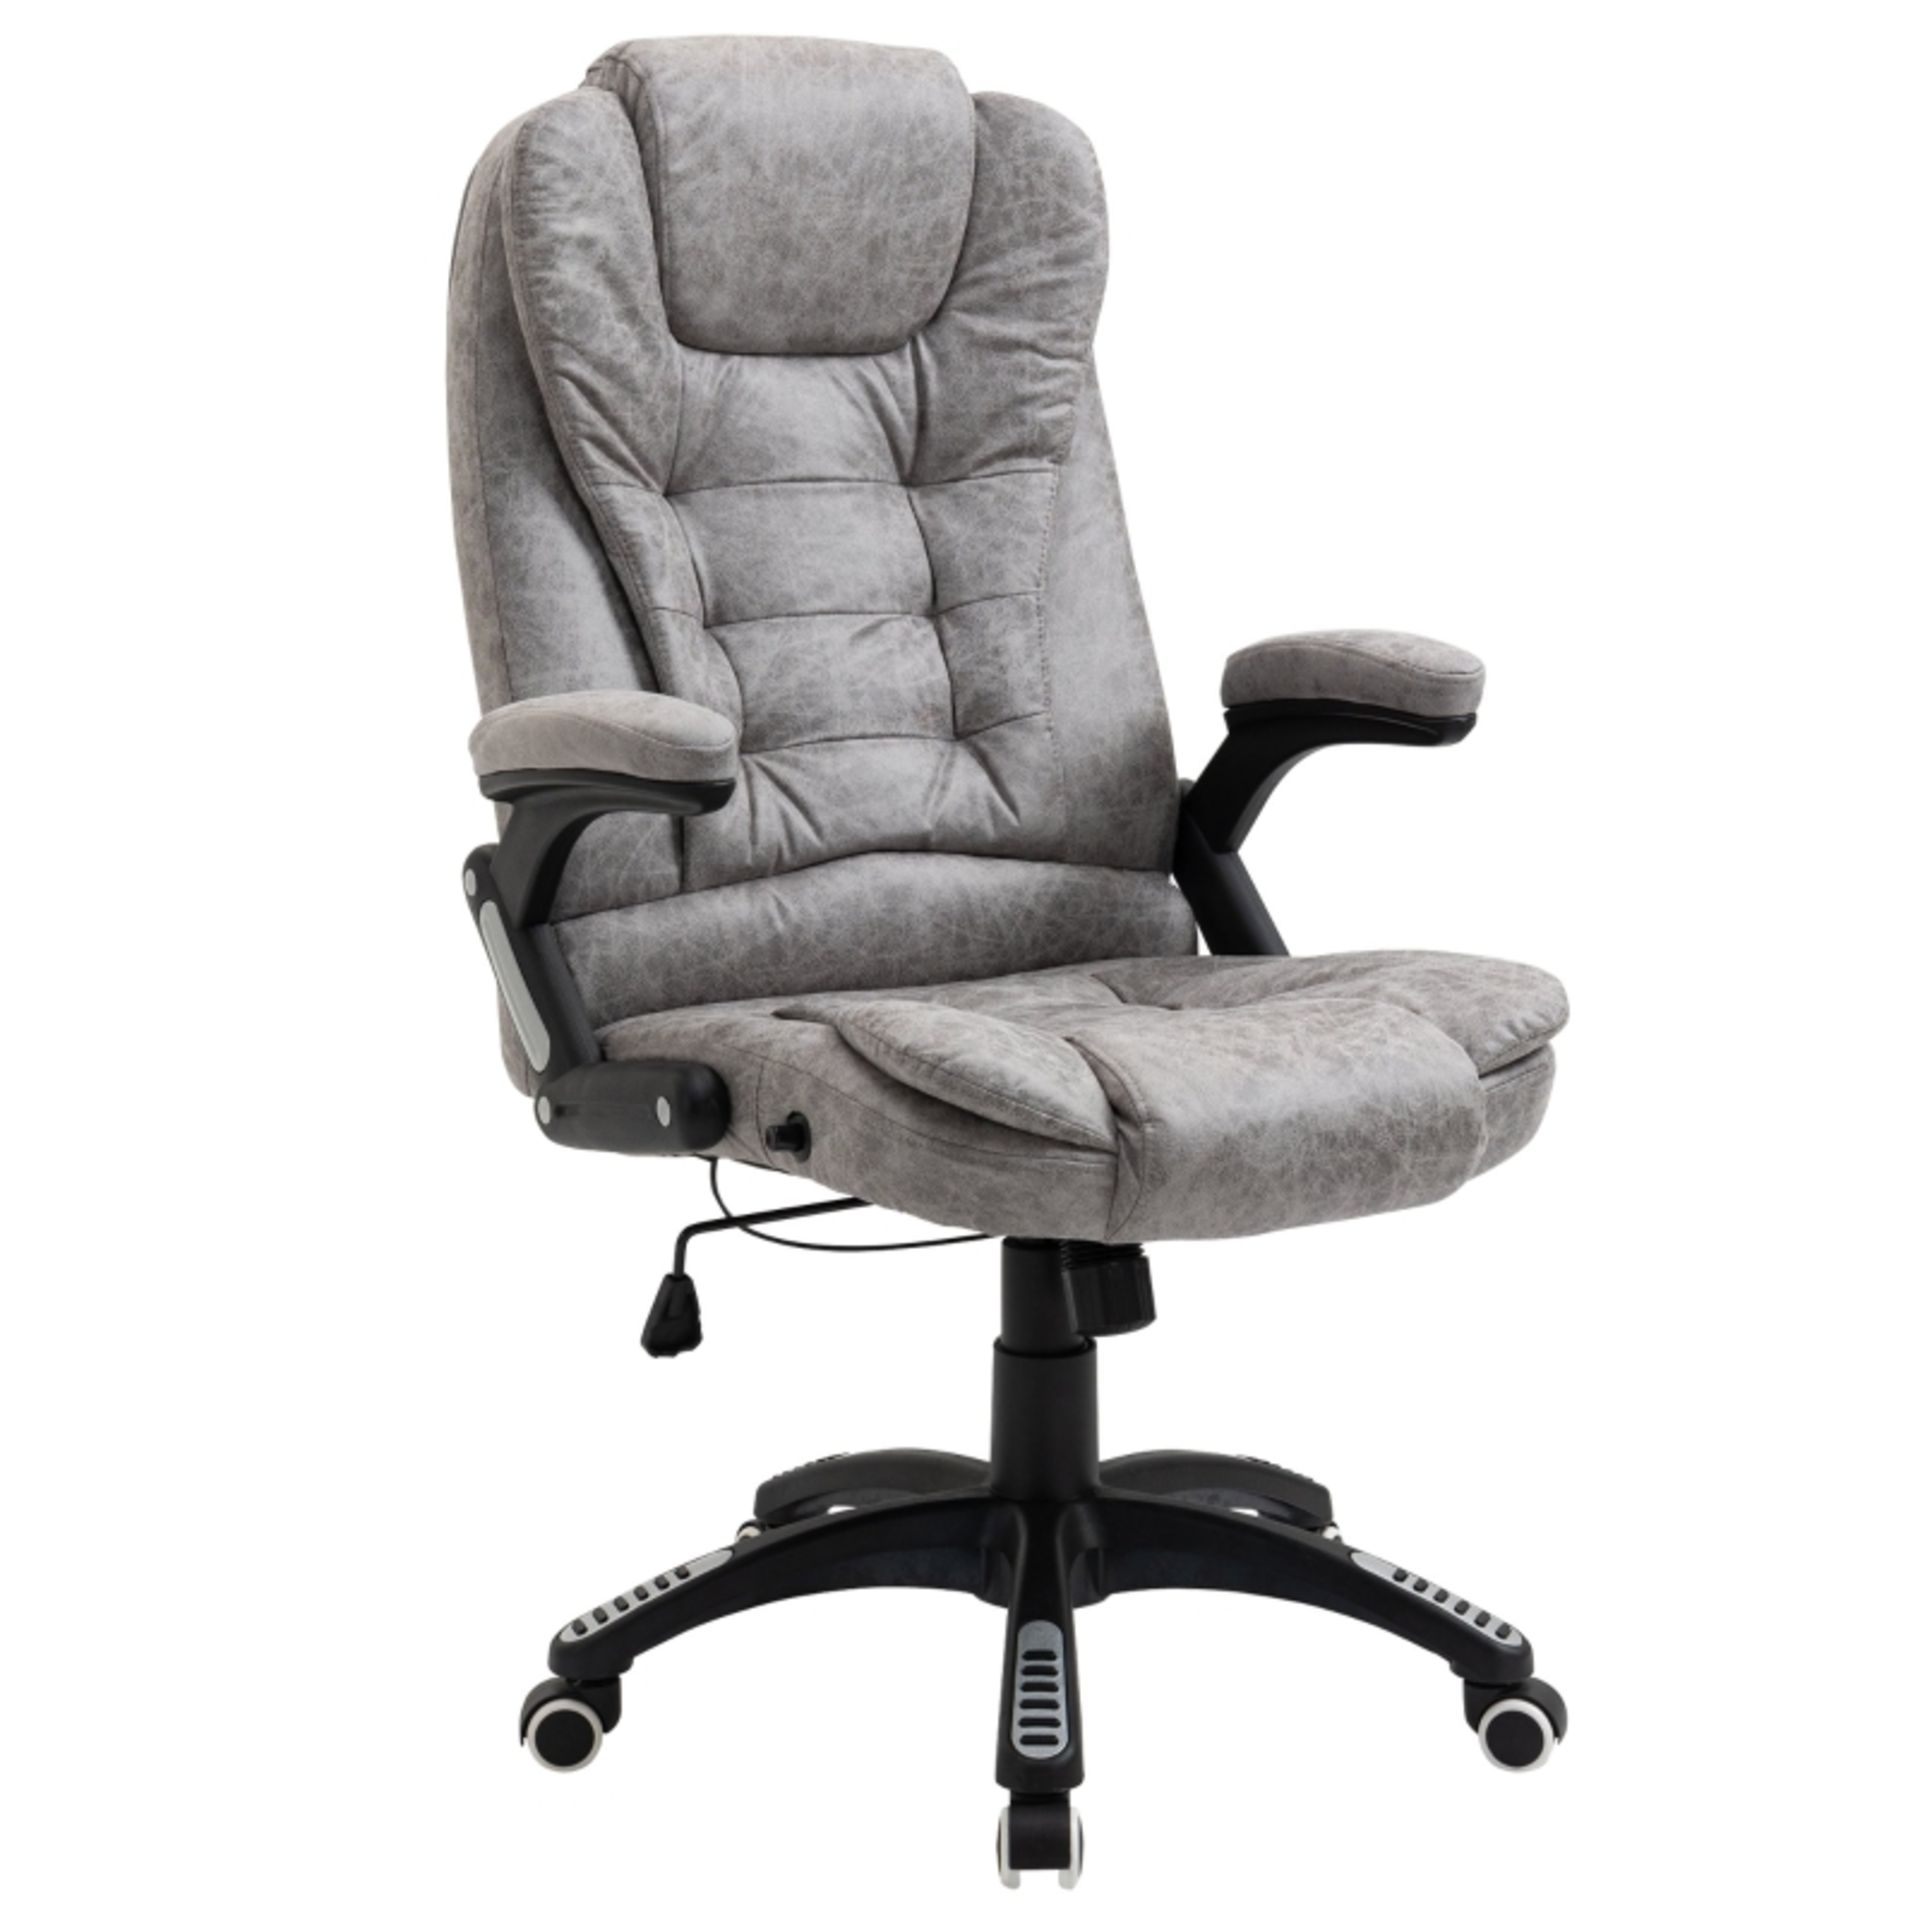 RRP £156.99 - Vinsetto High Back Home Office Chair Computer Desk Chair w/ Arm, Swivel Wheels, Grey